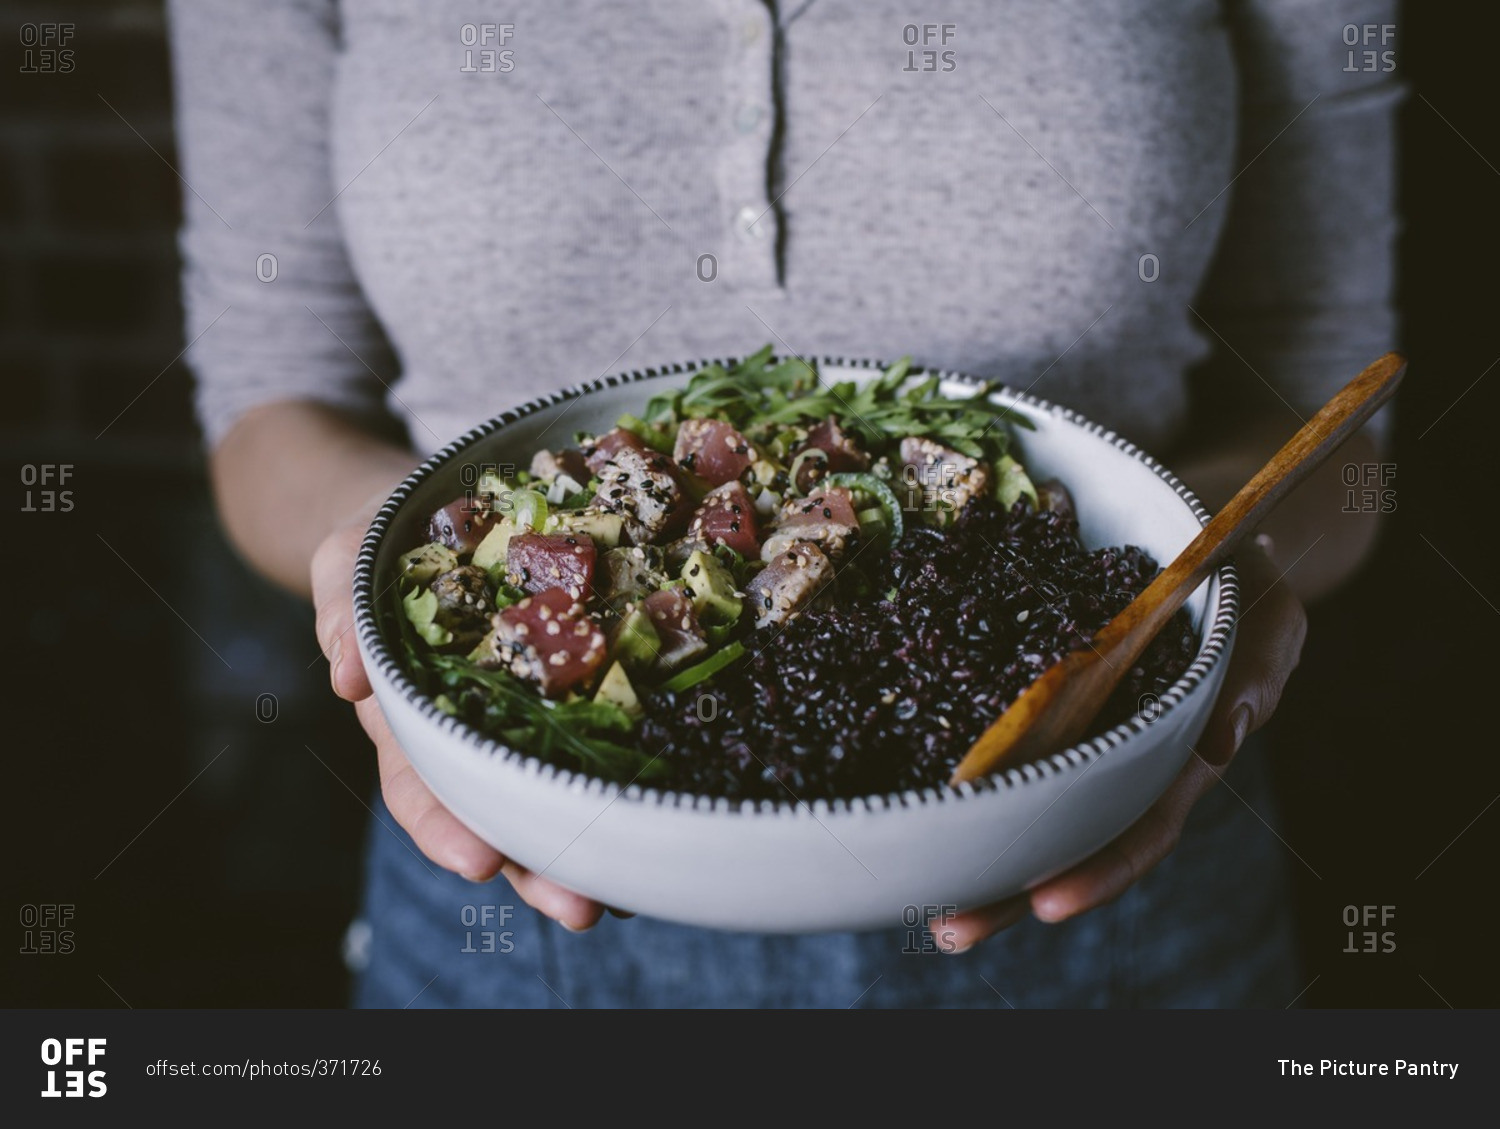 Woman holding a bowl filled with sesame crusted seared tuna salad and forbidden rice